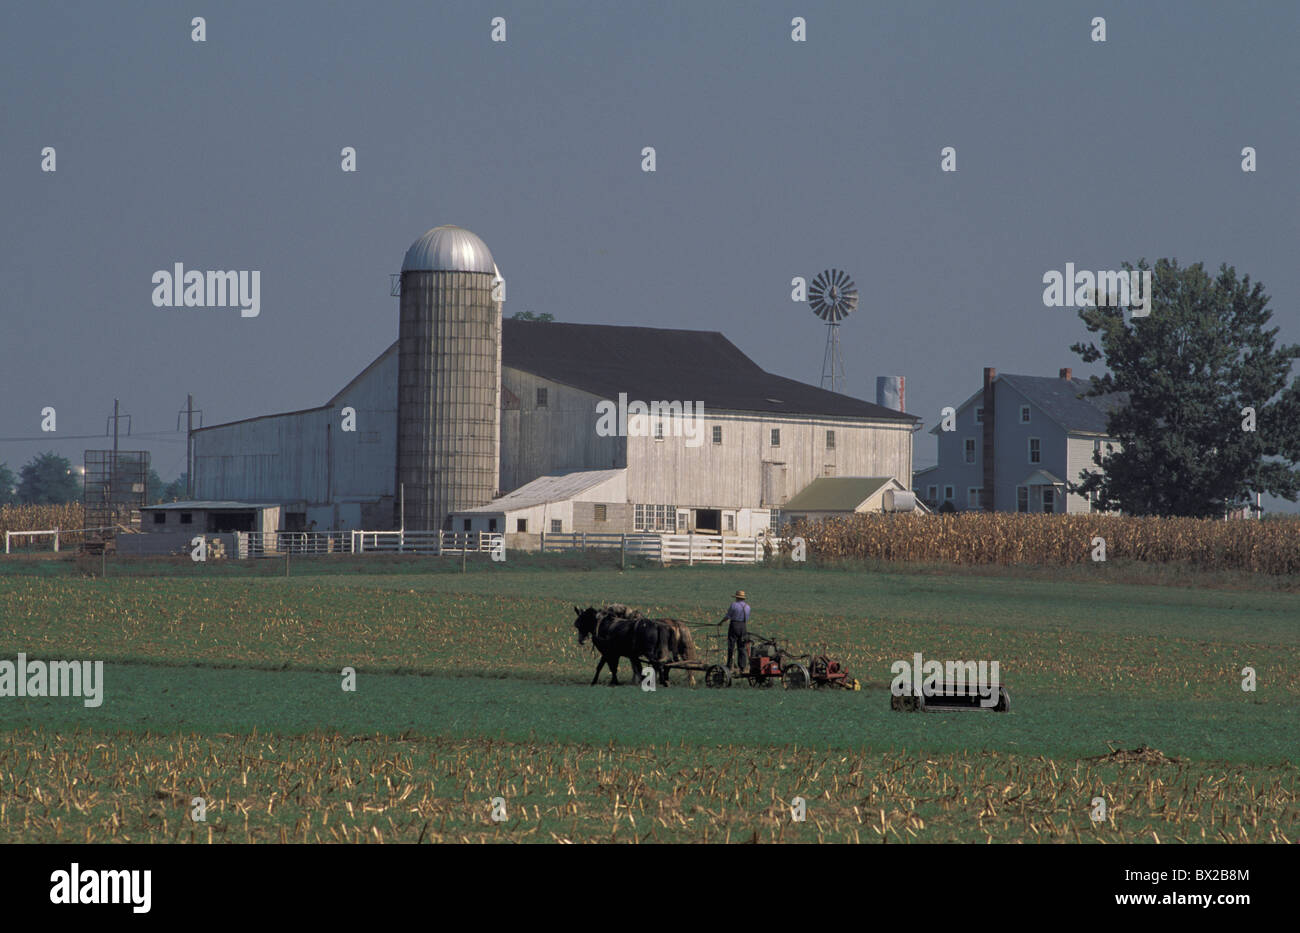 Paradise Pennsylvania USA United States America old fashioned Bird cages agriculteurs Amish ferme champ chevaux agricu Banque D'Images